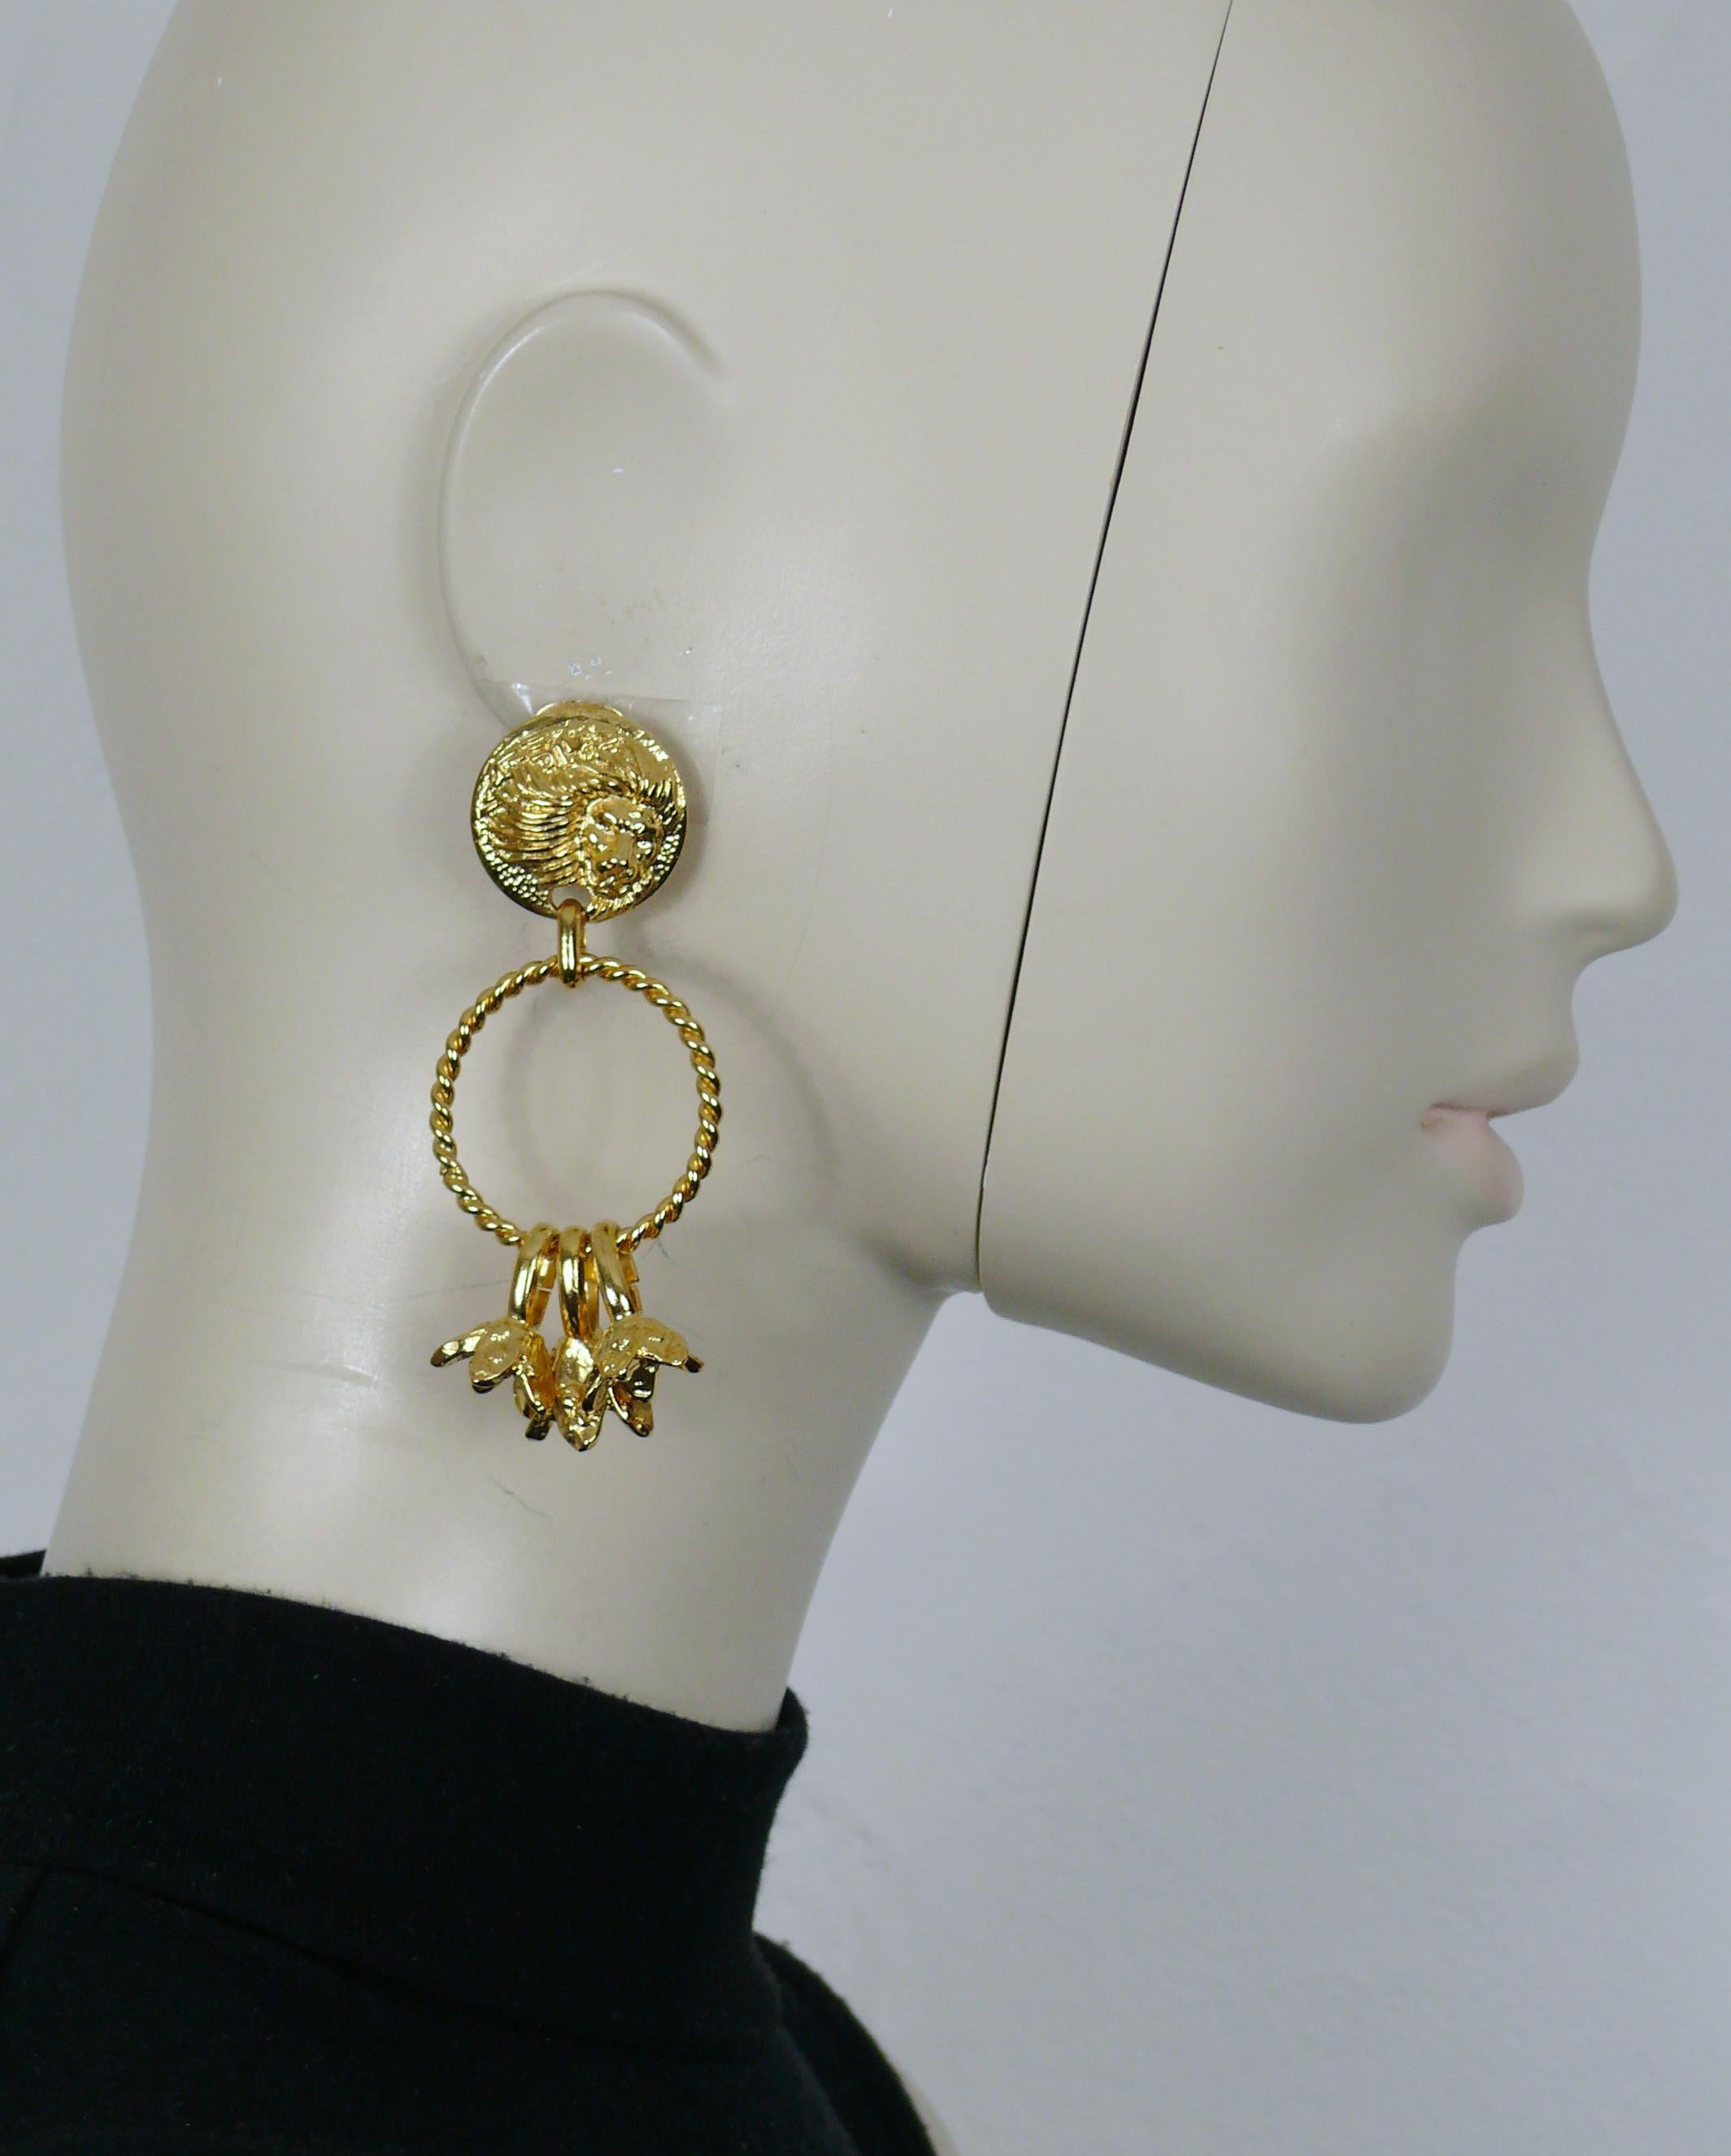 VERSUS by GIANNI VERSACE vintage gold tone lion head dangling earrings (clip-on).

Embossed VERSUS Made in Italy.

Indicative measurements : height approx. 8.5 cm (3.35 inches) / max. width approx. 3.5 cm (1.38 inches).

Weight per earring : approx.